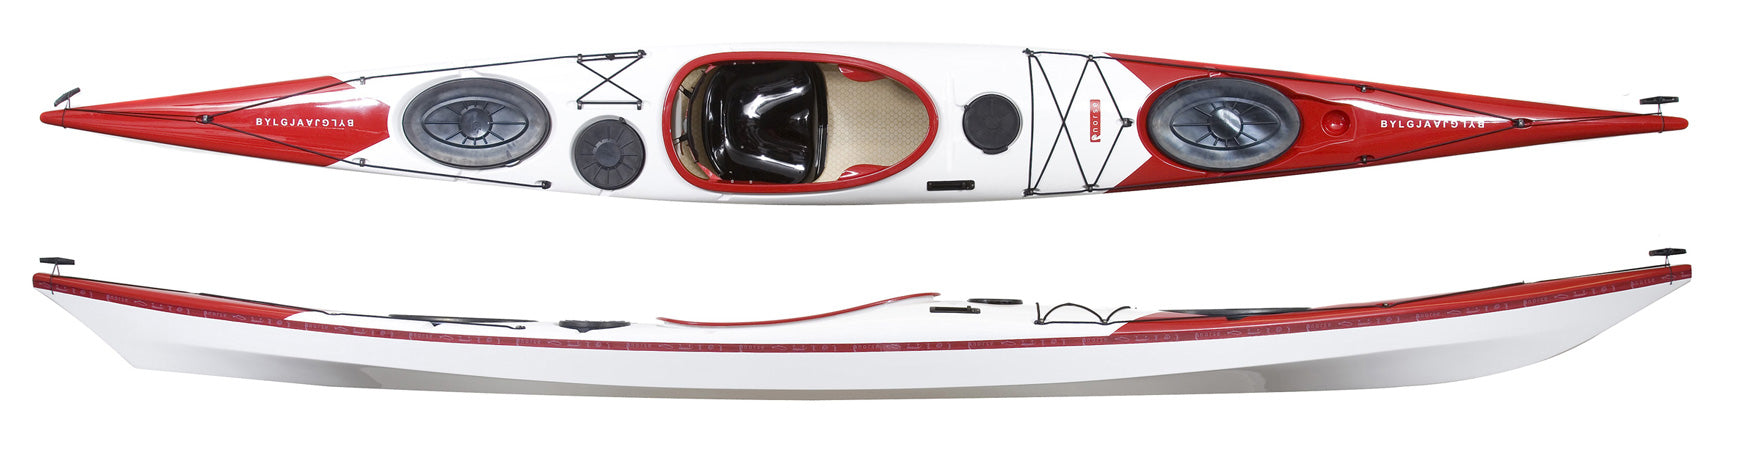 Norse Bylgja Composite sea kayaks - available to buy from Canoe Shops UK stores Red and White FibreGlass